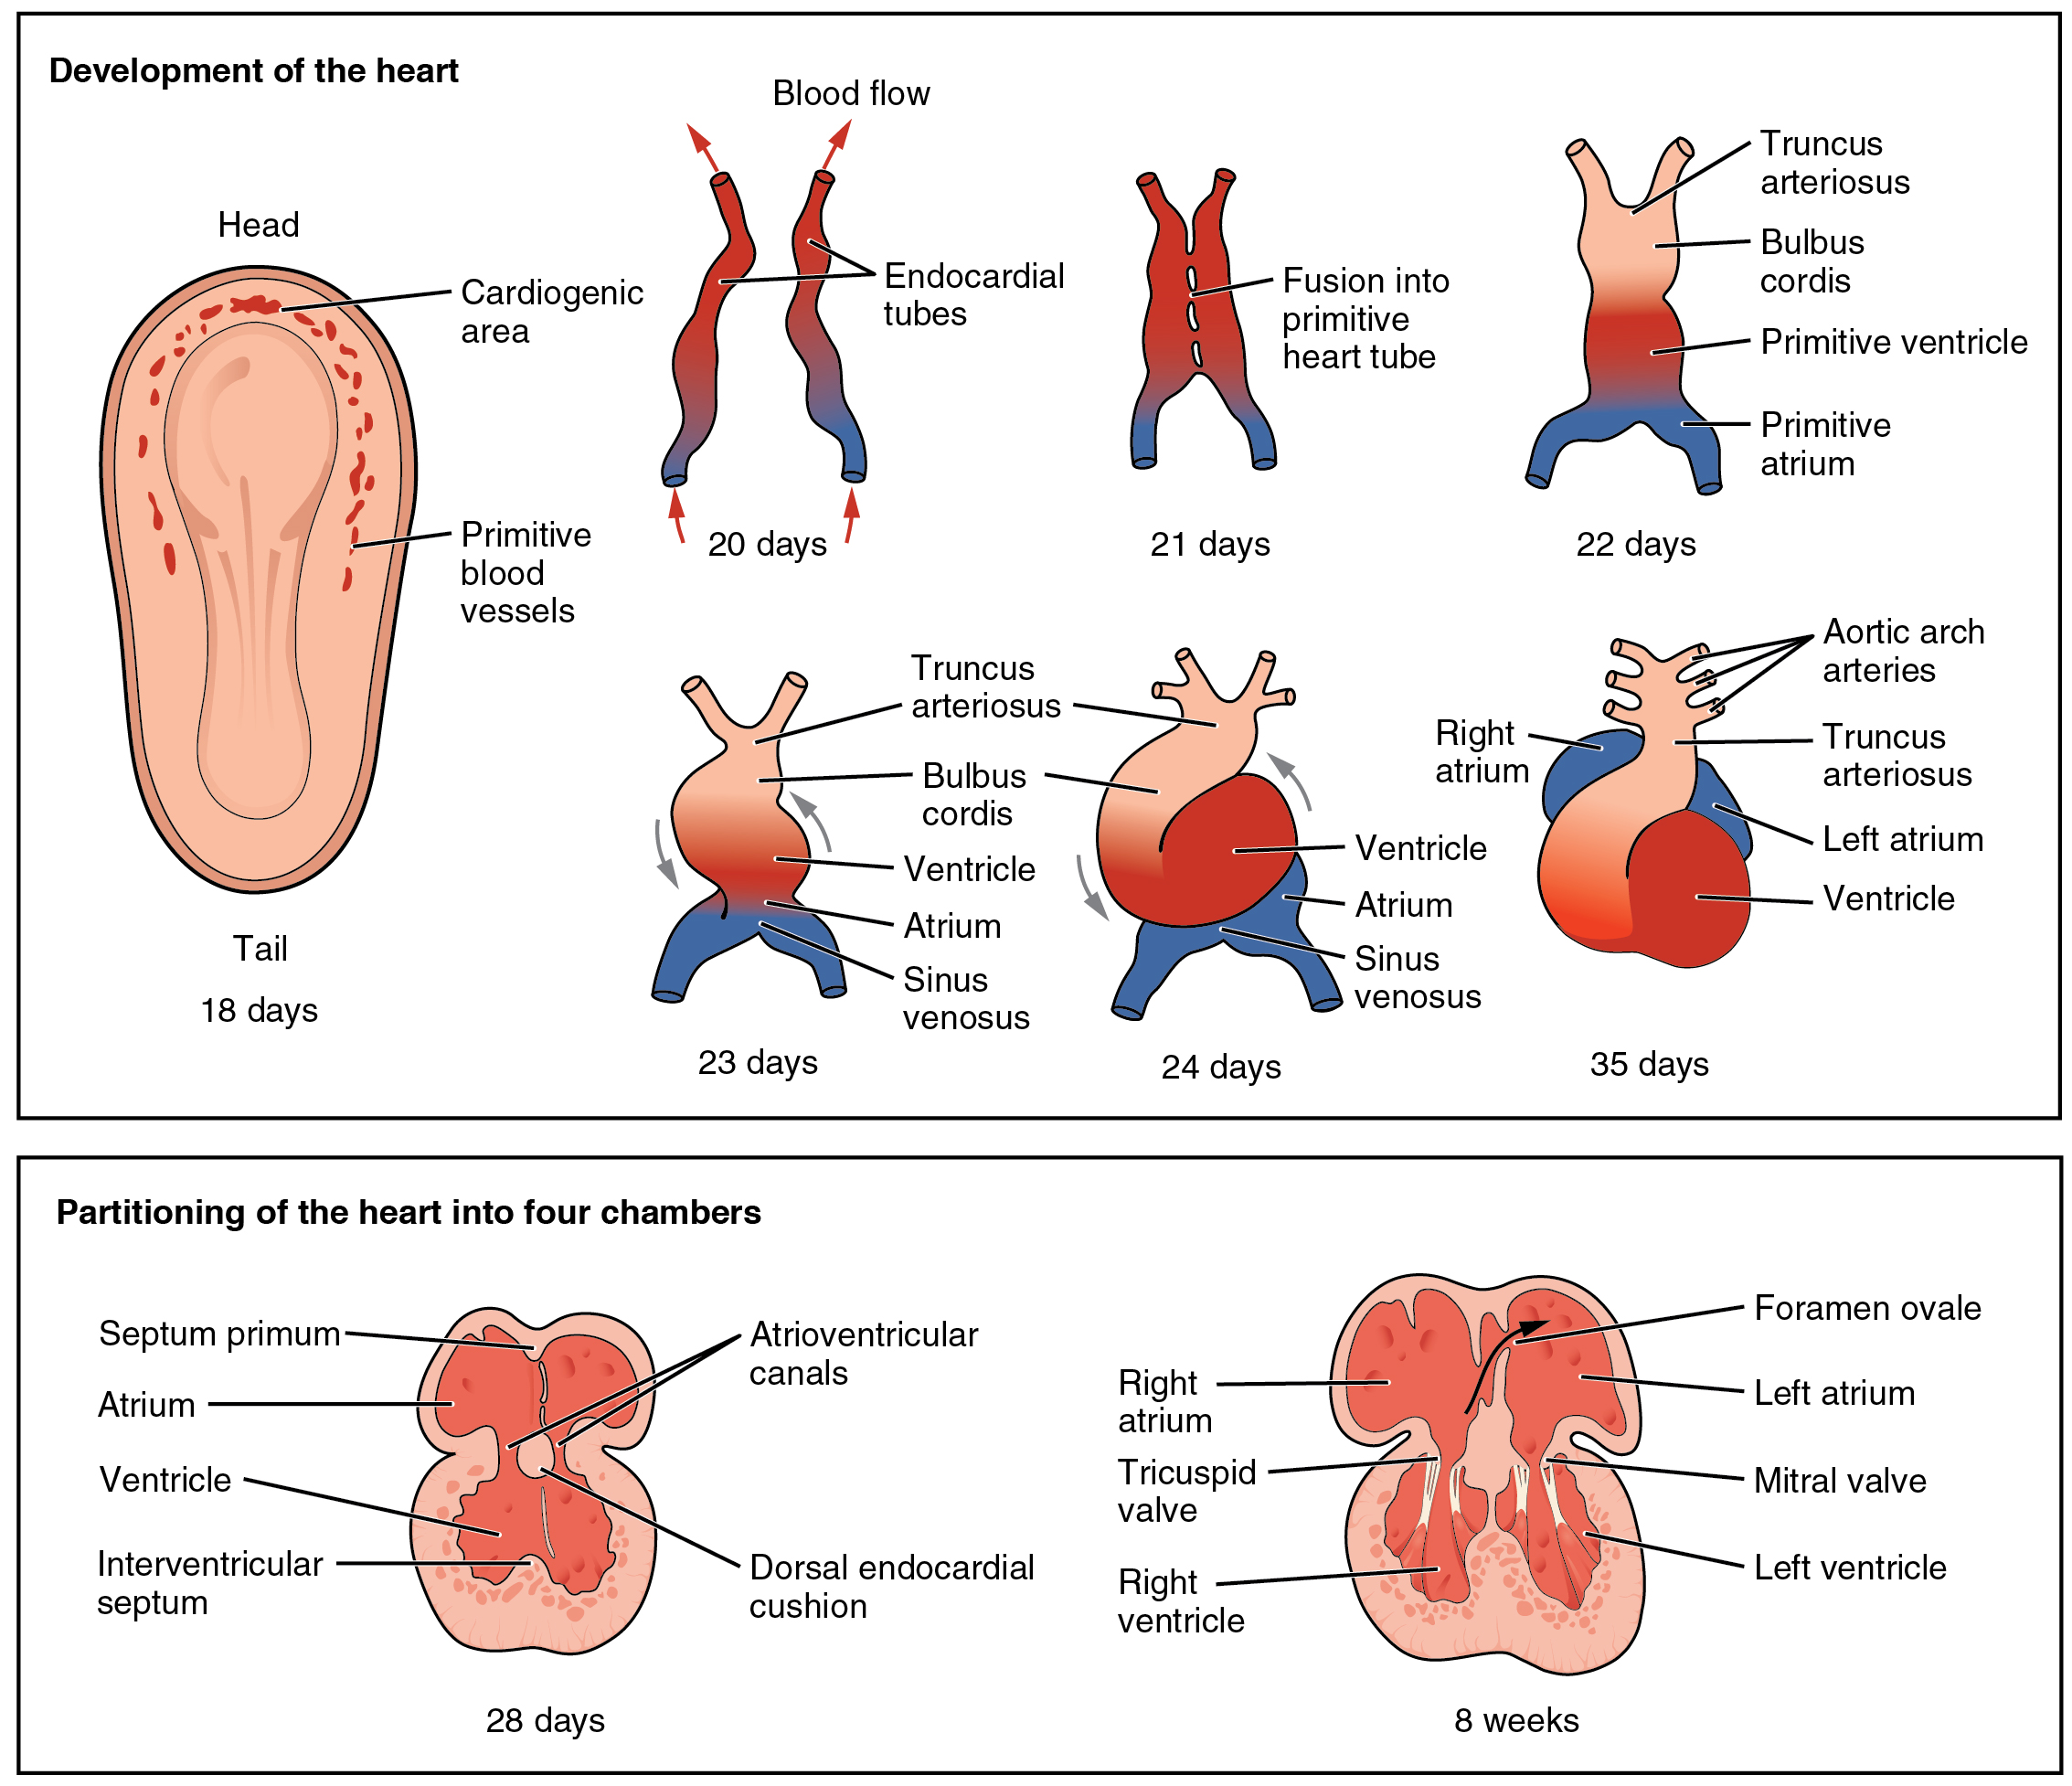 Embryonic development of the heart.